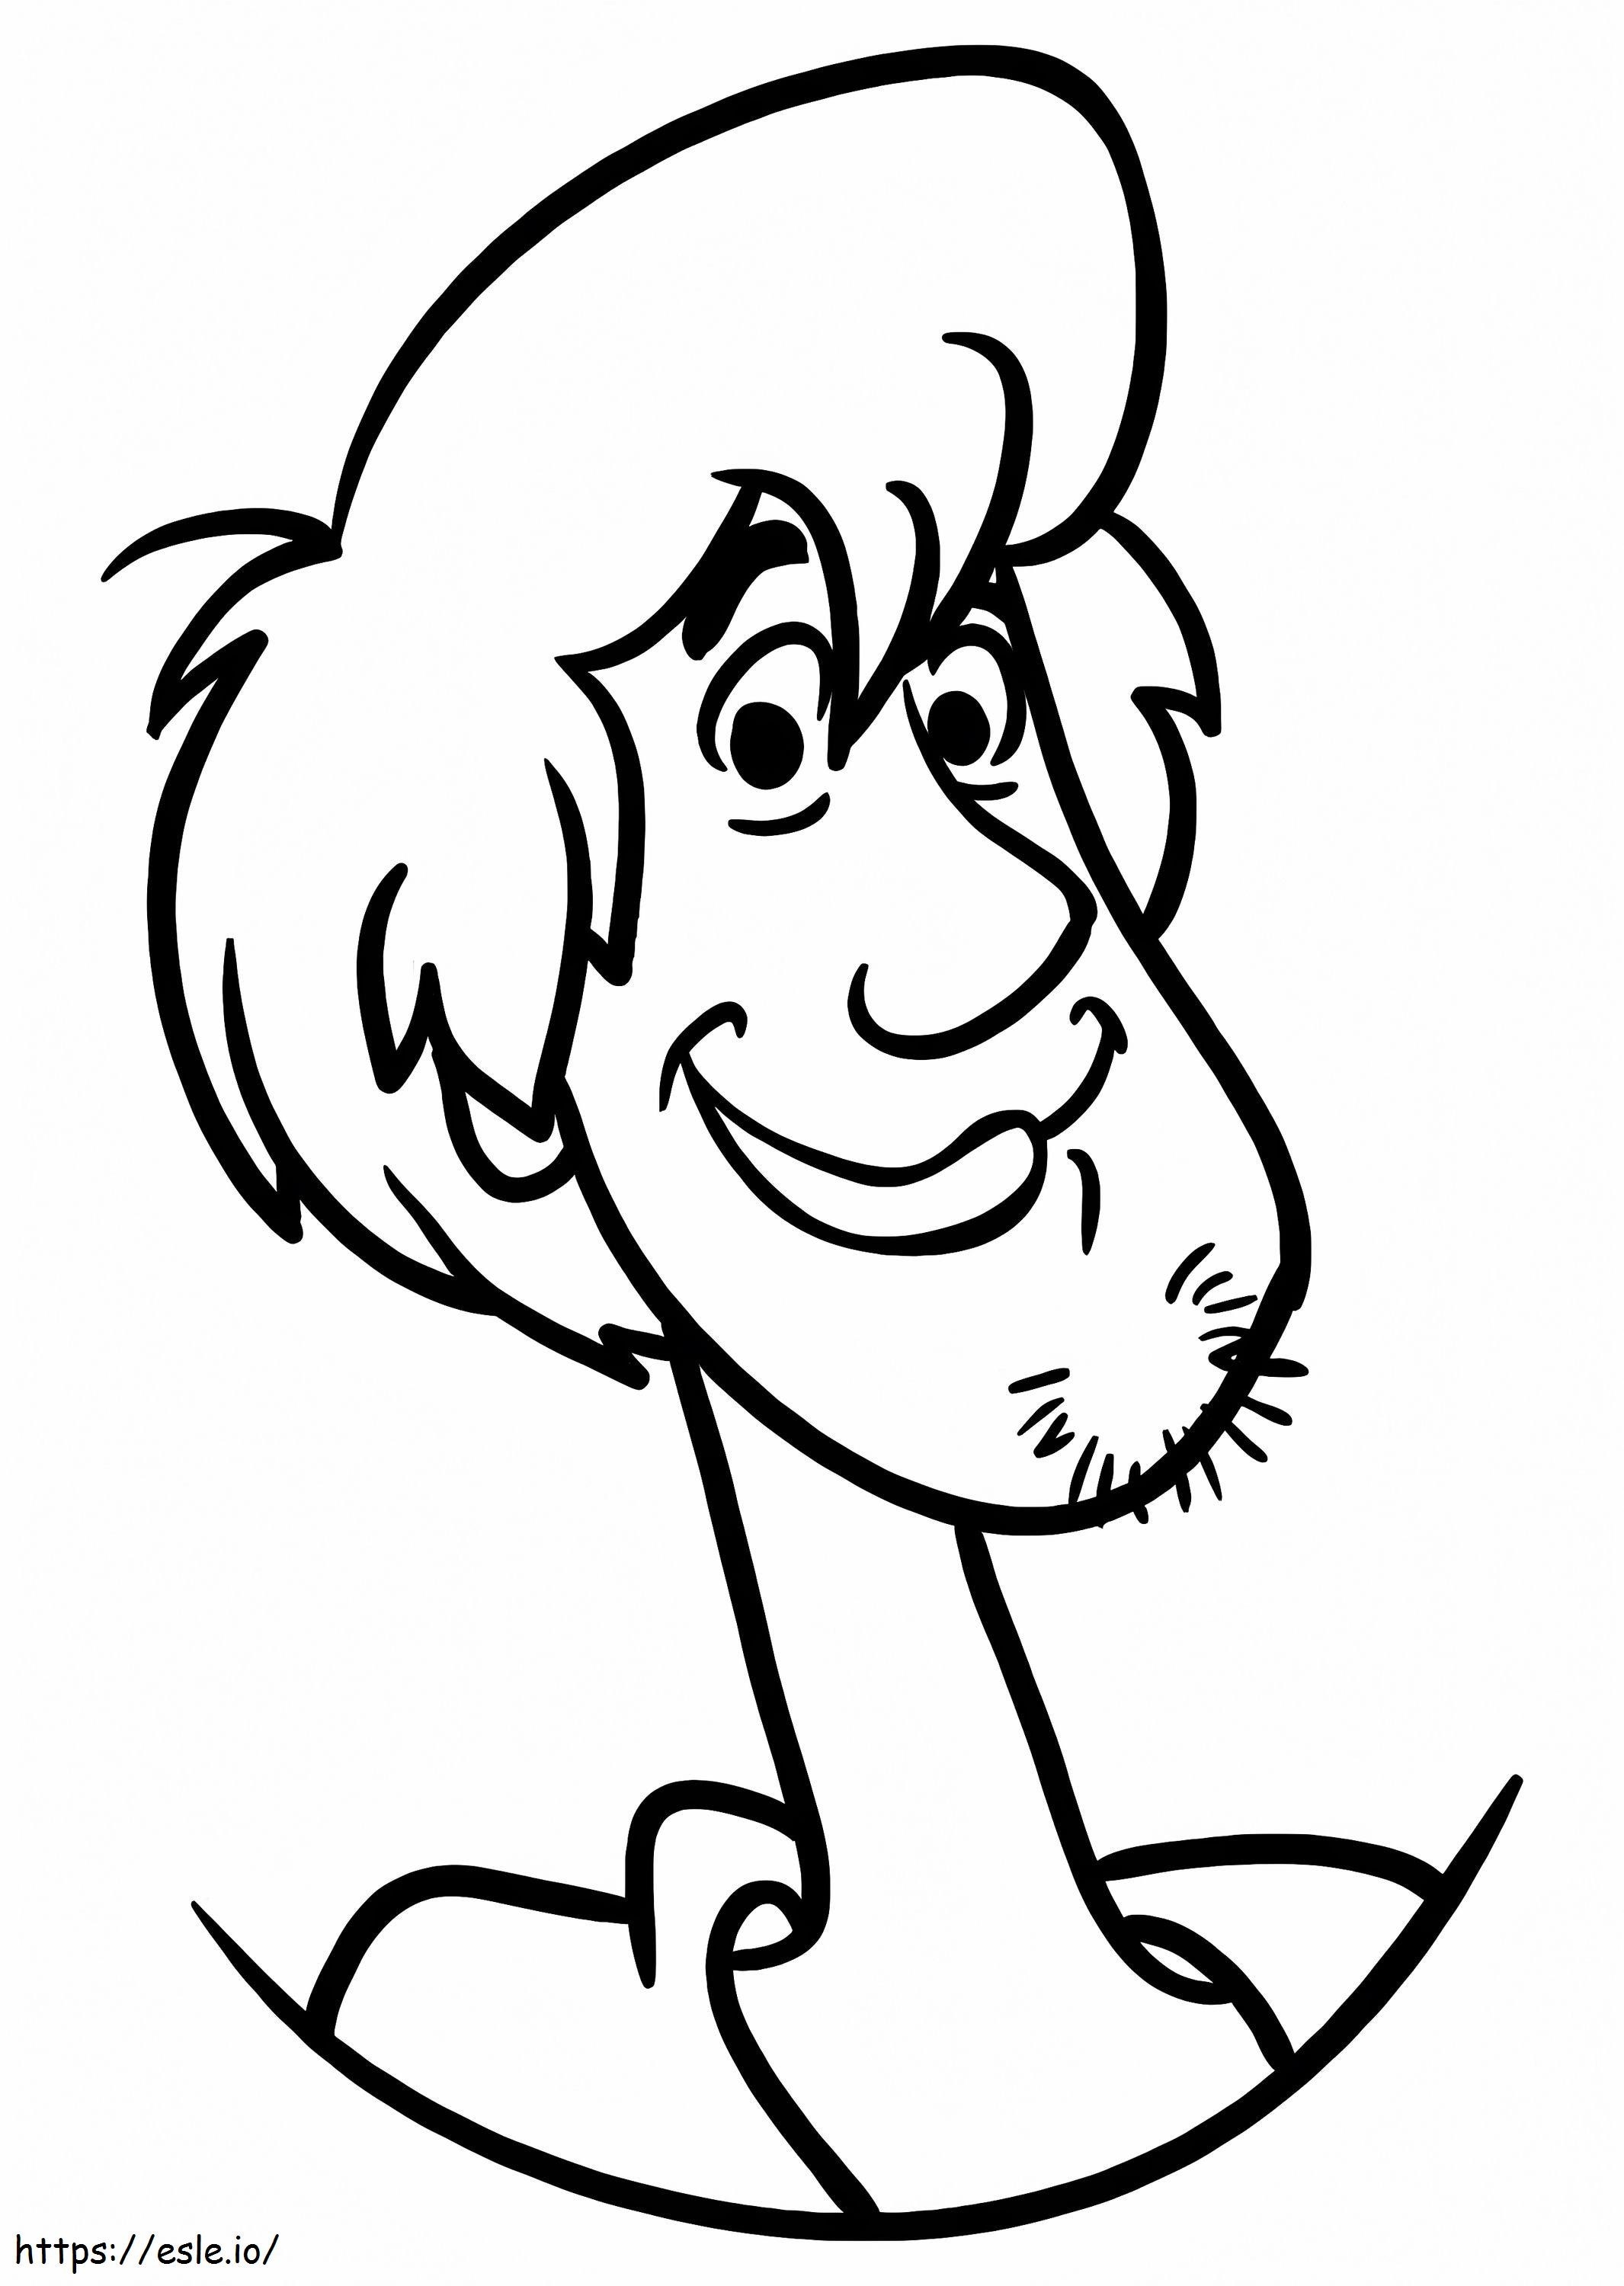 Shaggy Face coloring page